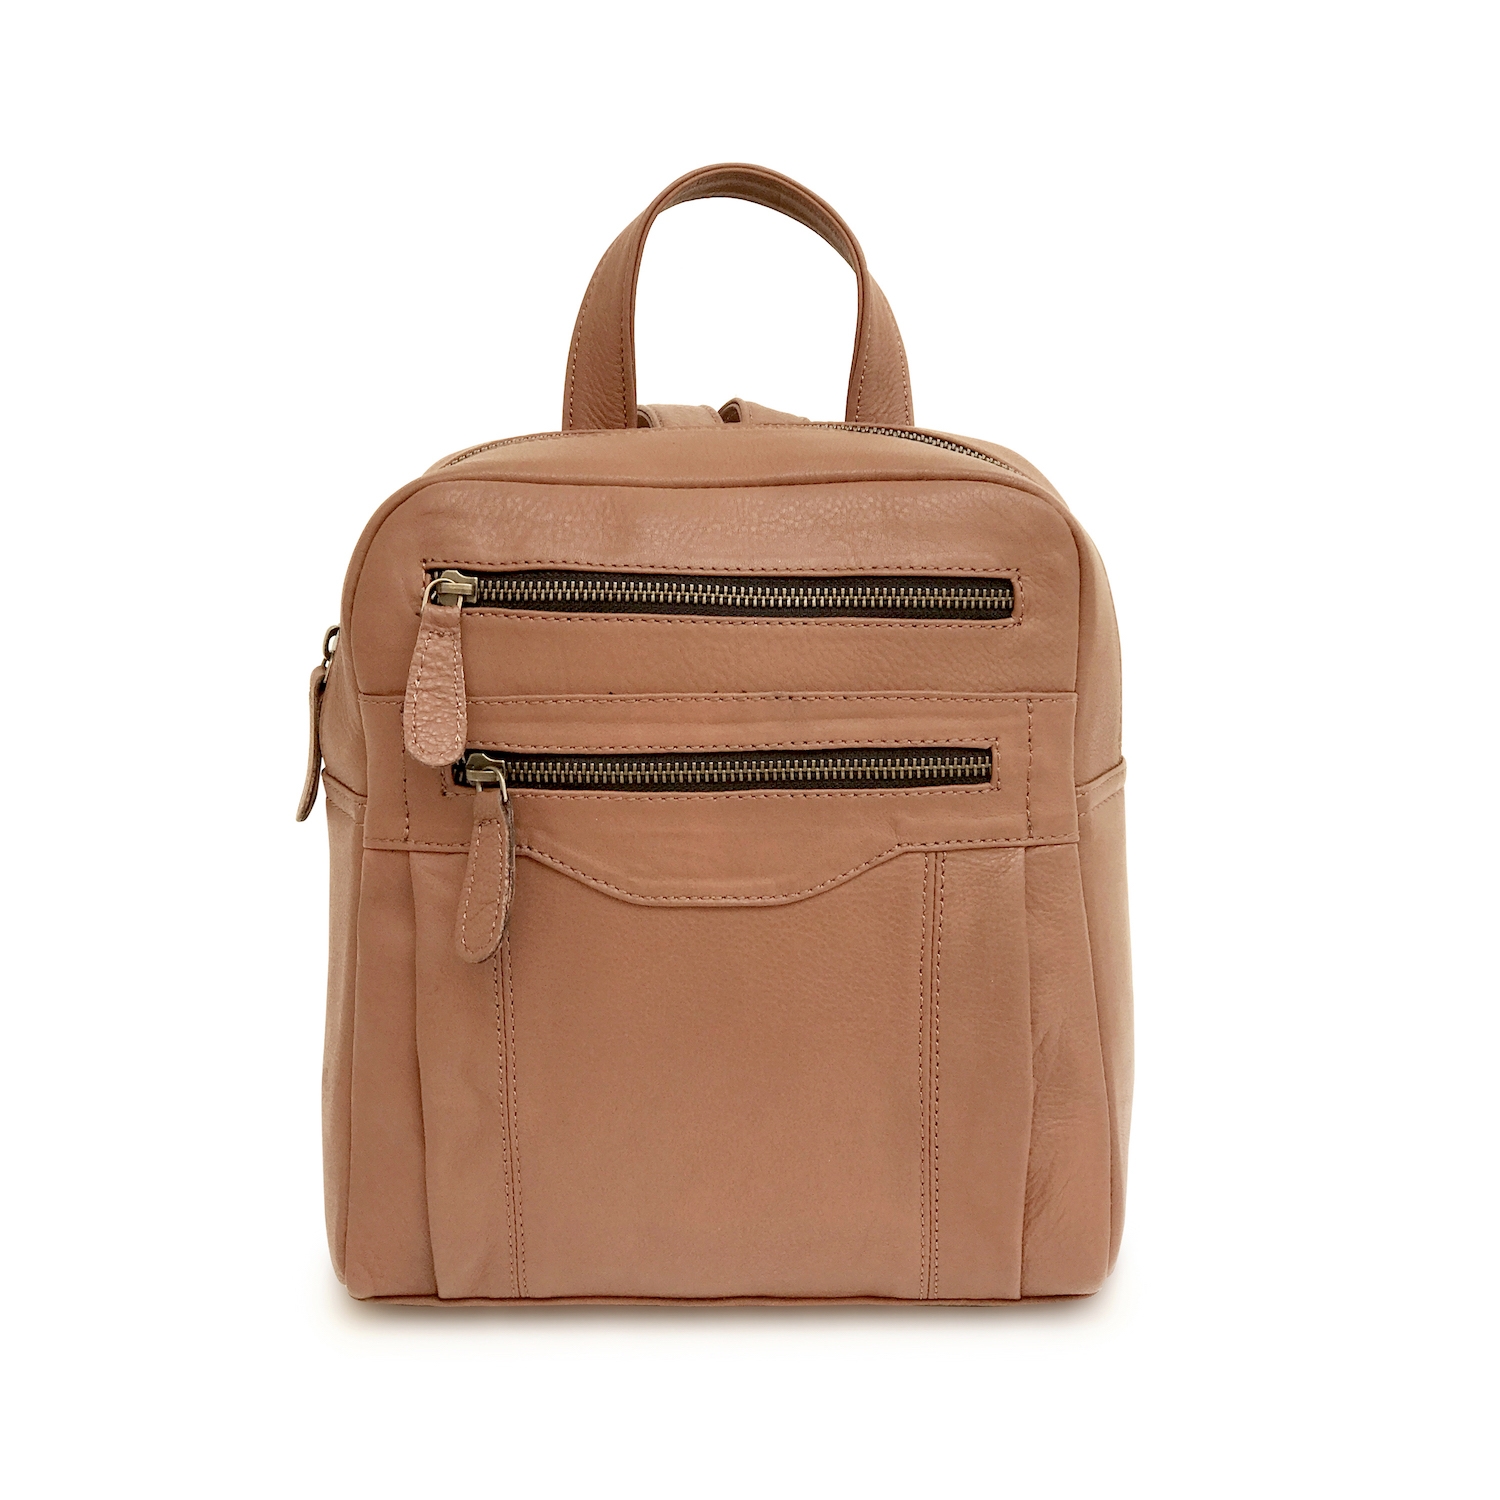 Tan Leather Backpack | Travel Backpack Women